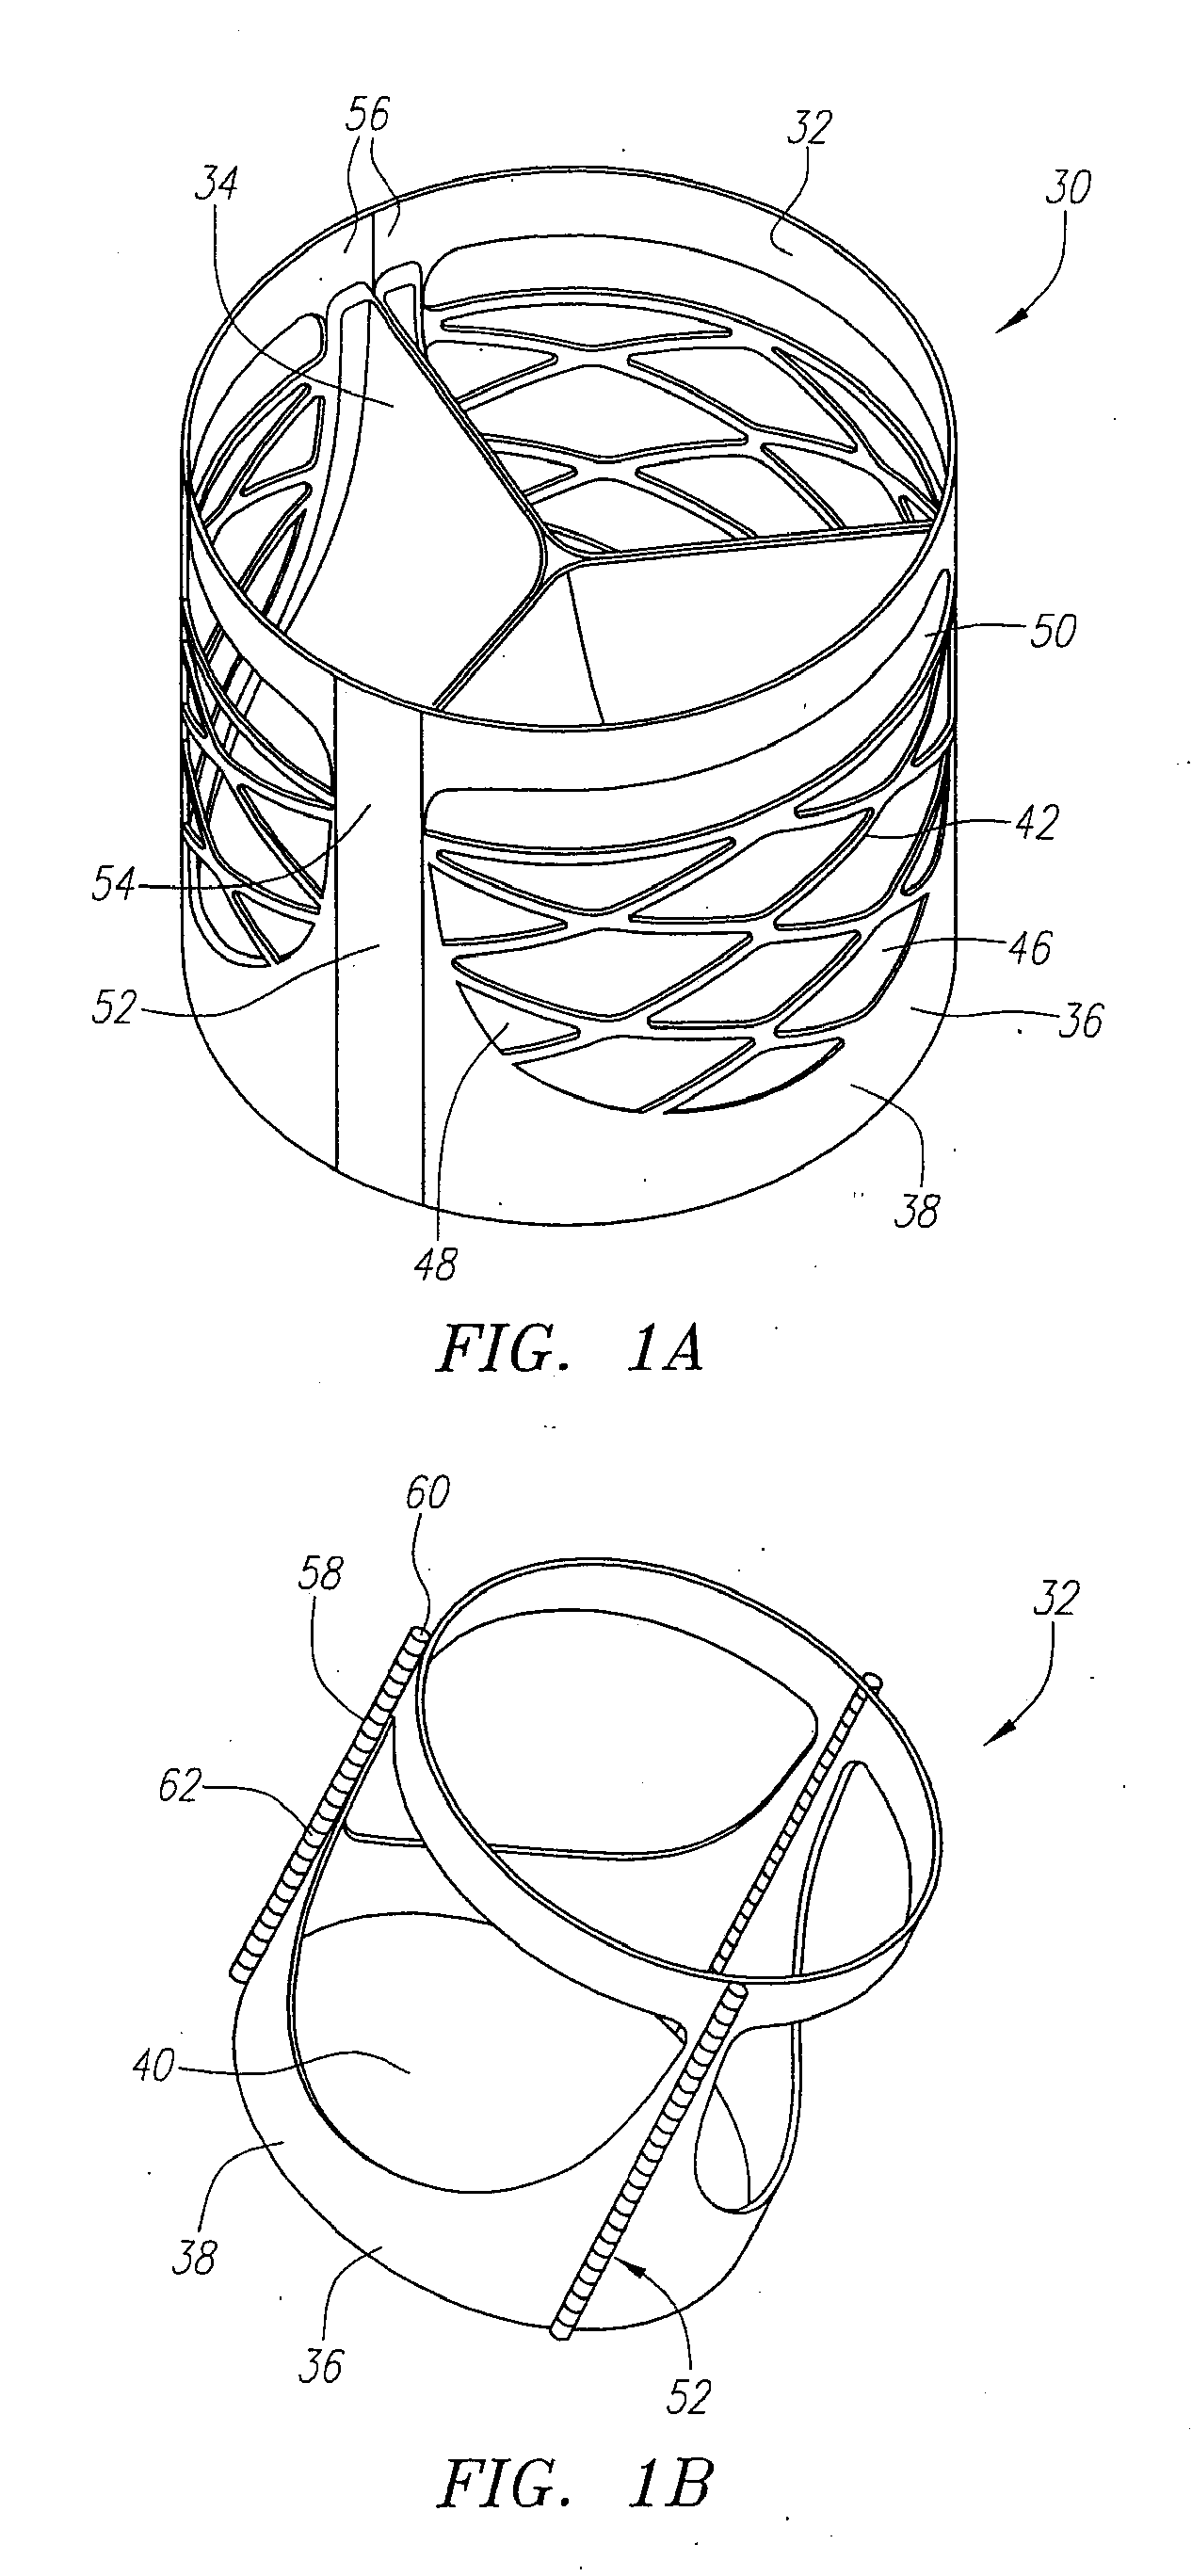 Prosthetic Heart Valves, Support Structures And Systems And Methods For Implanting The Same